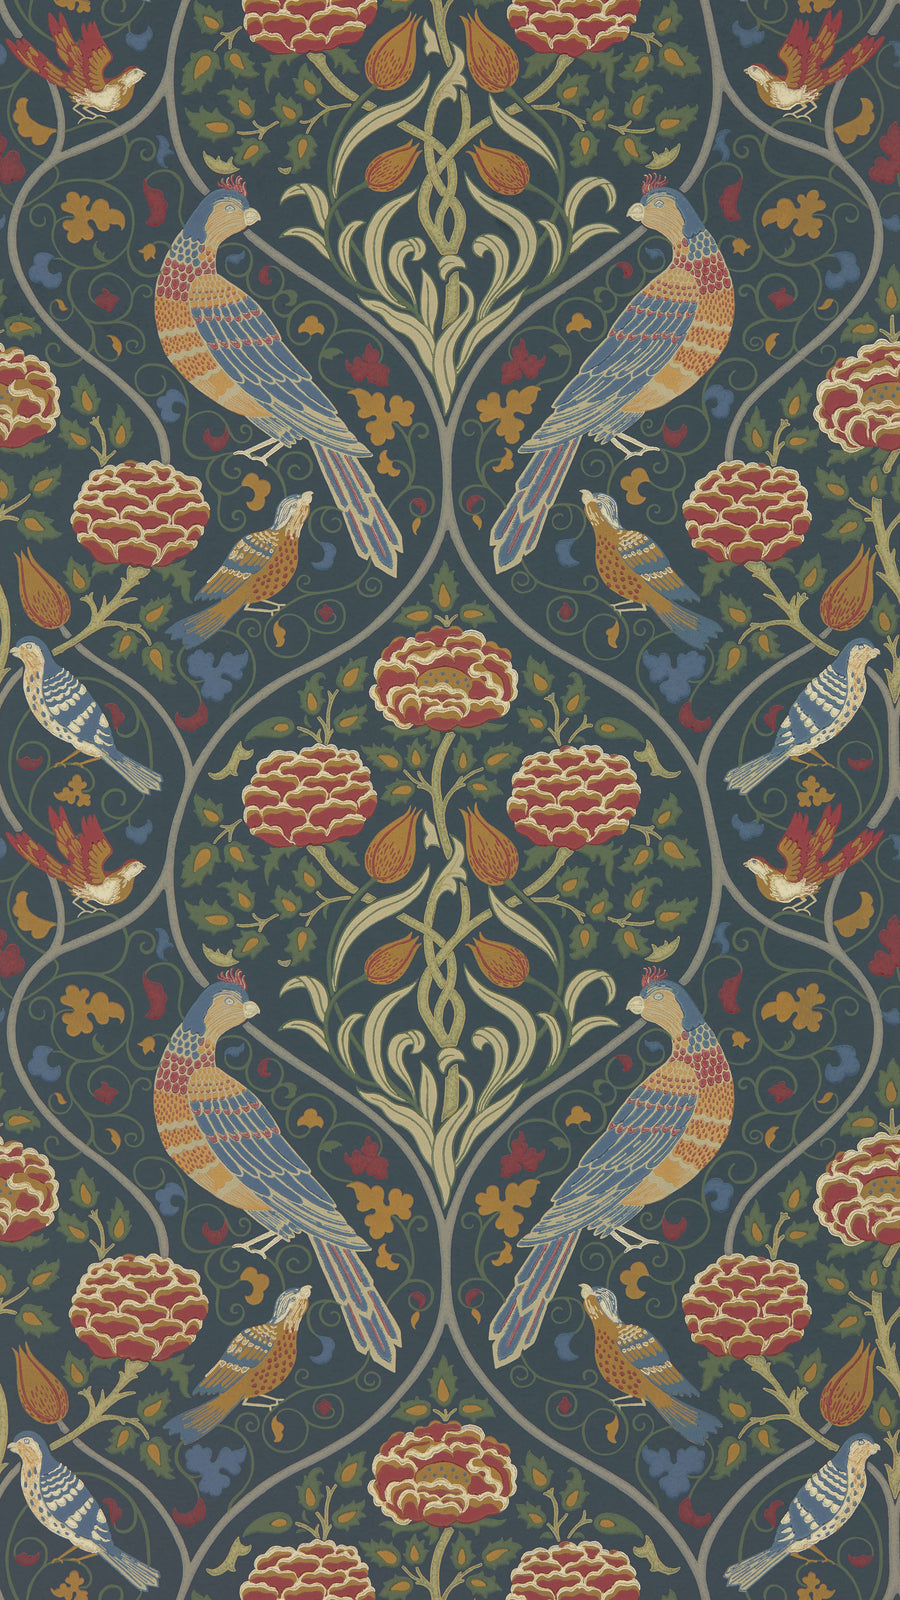 MORRIS & Co.(ウィリアム・モリス) / Archive Wallpapers 5 MELSETTER / Seasons by May 216686